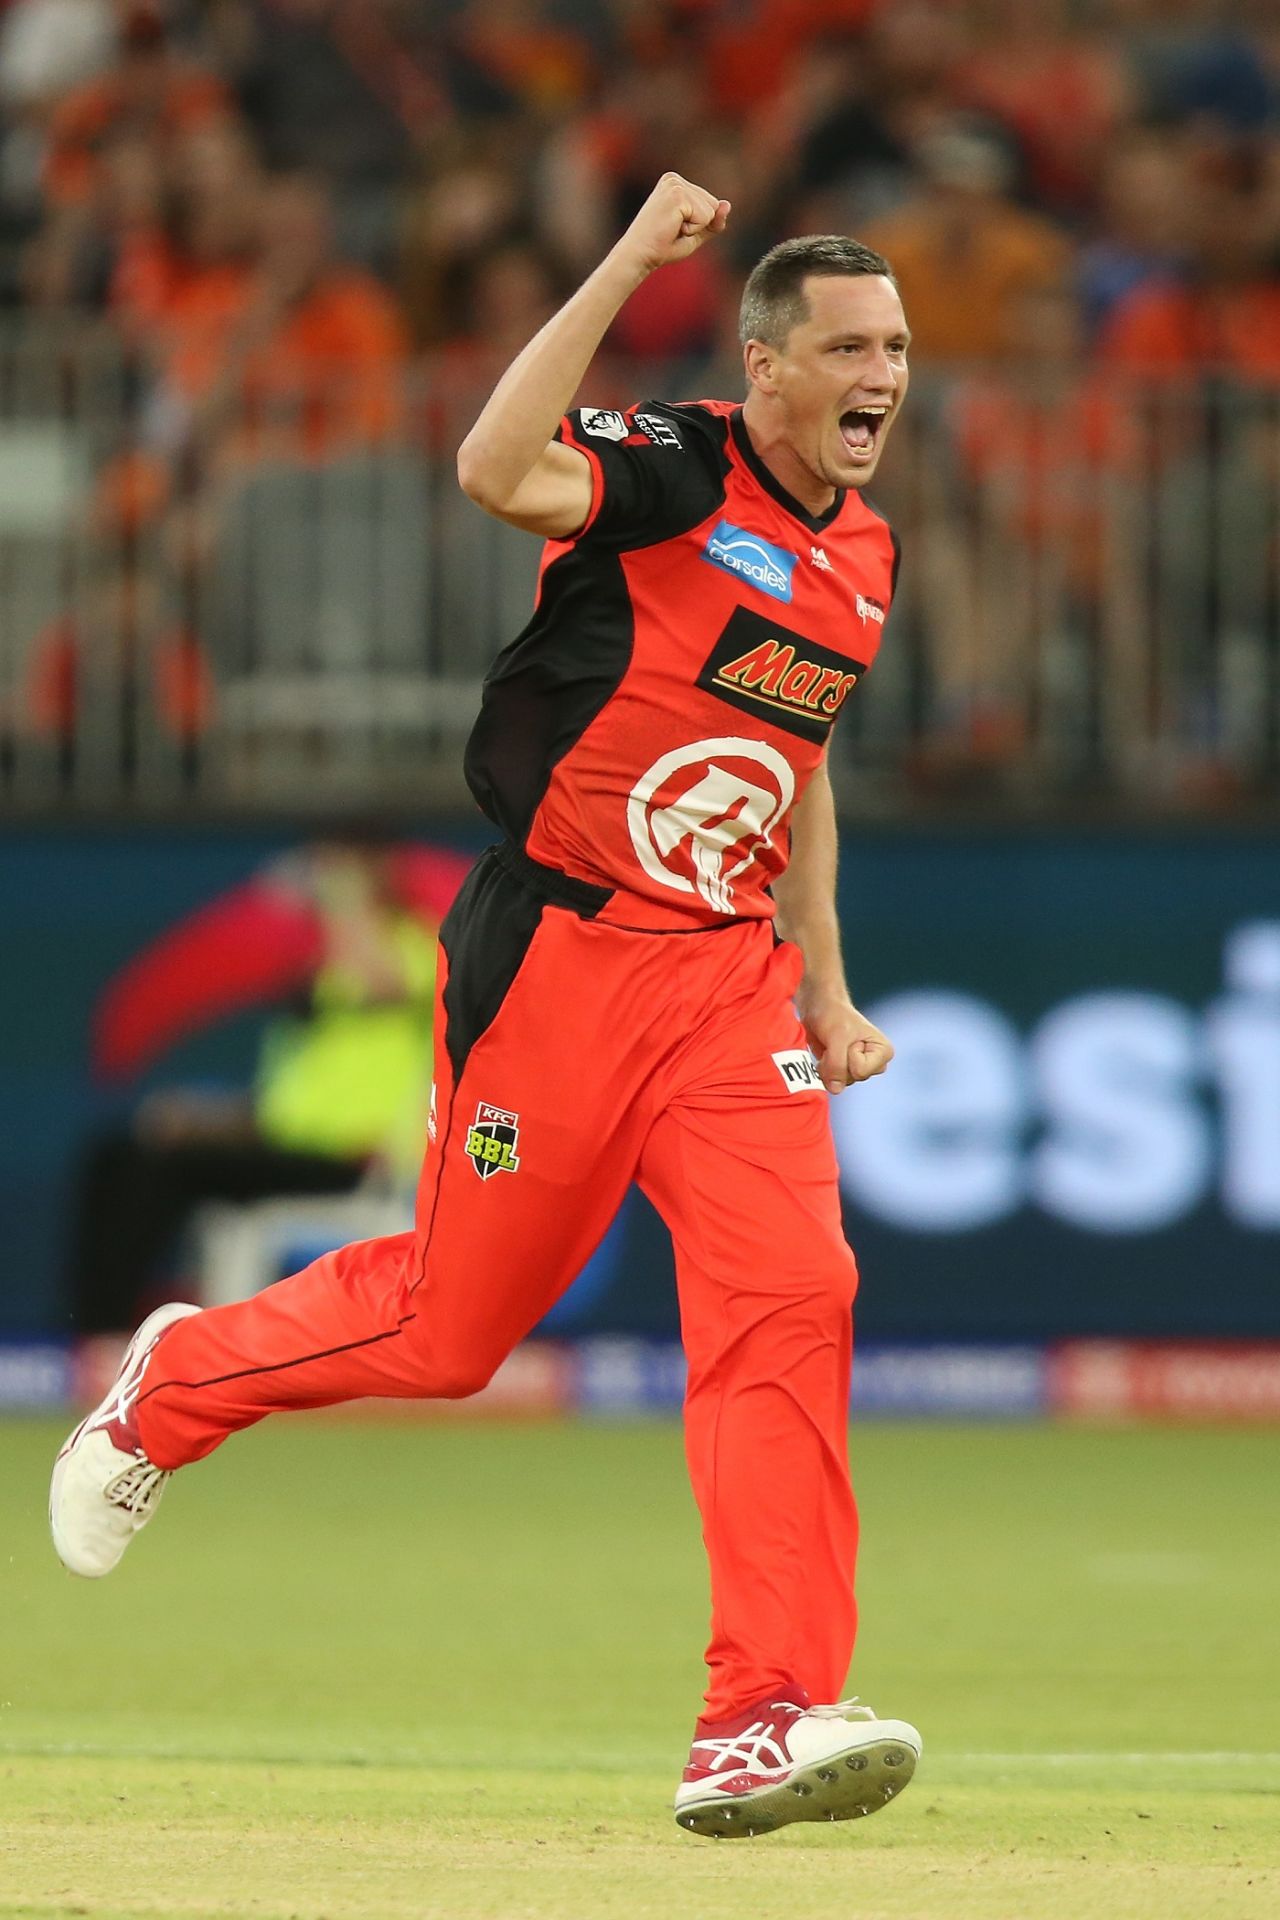 Chris Tremain was irresistible, bowling his four overs on the trot to take 3 for 9, Perth Scorchers v Melbourne Renegades, Big Bash League 2018-19, Match 43, January 28, 2019